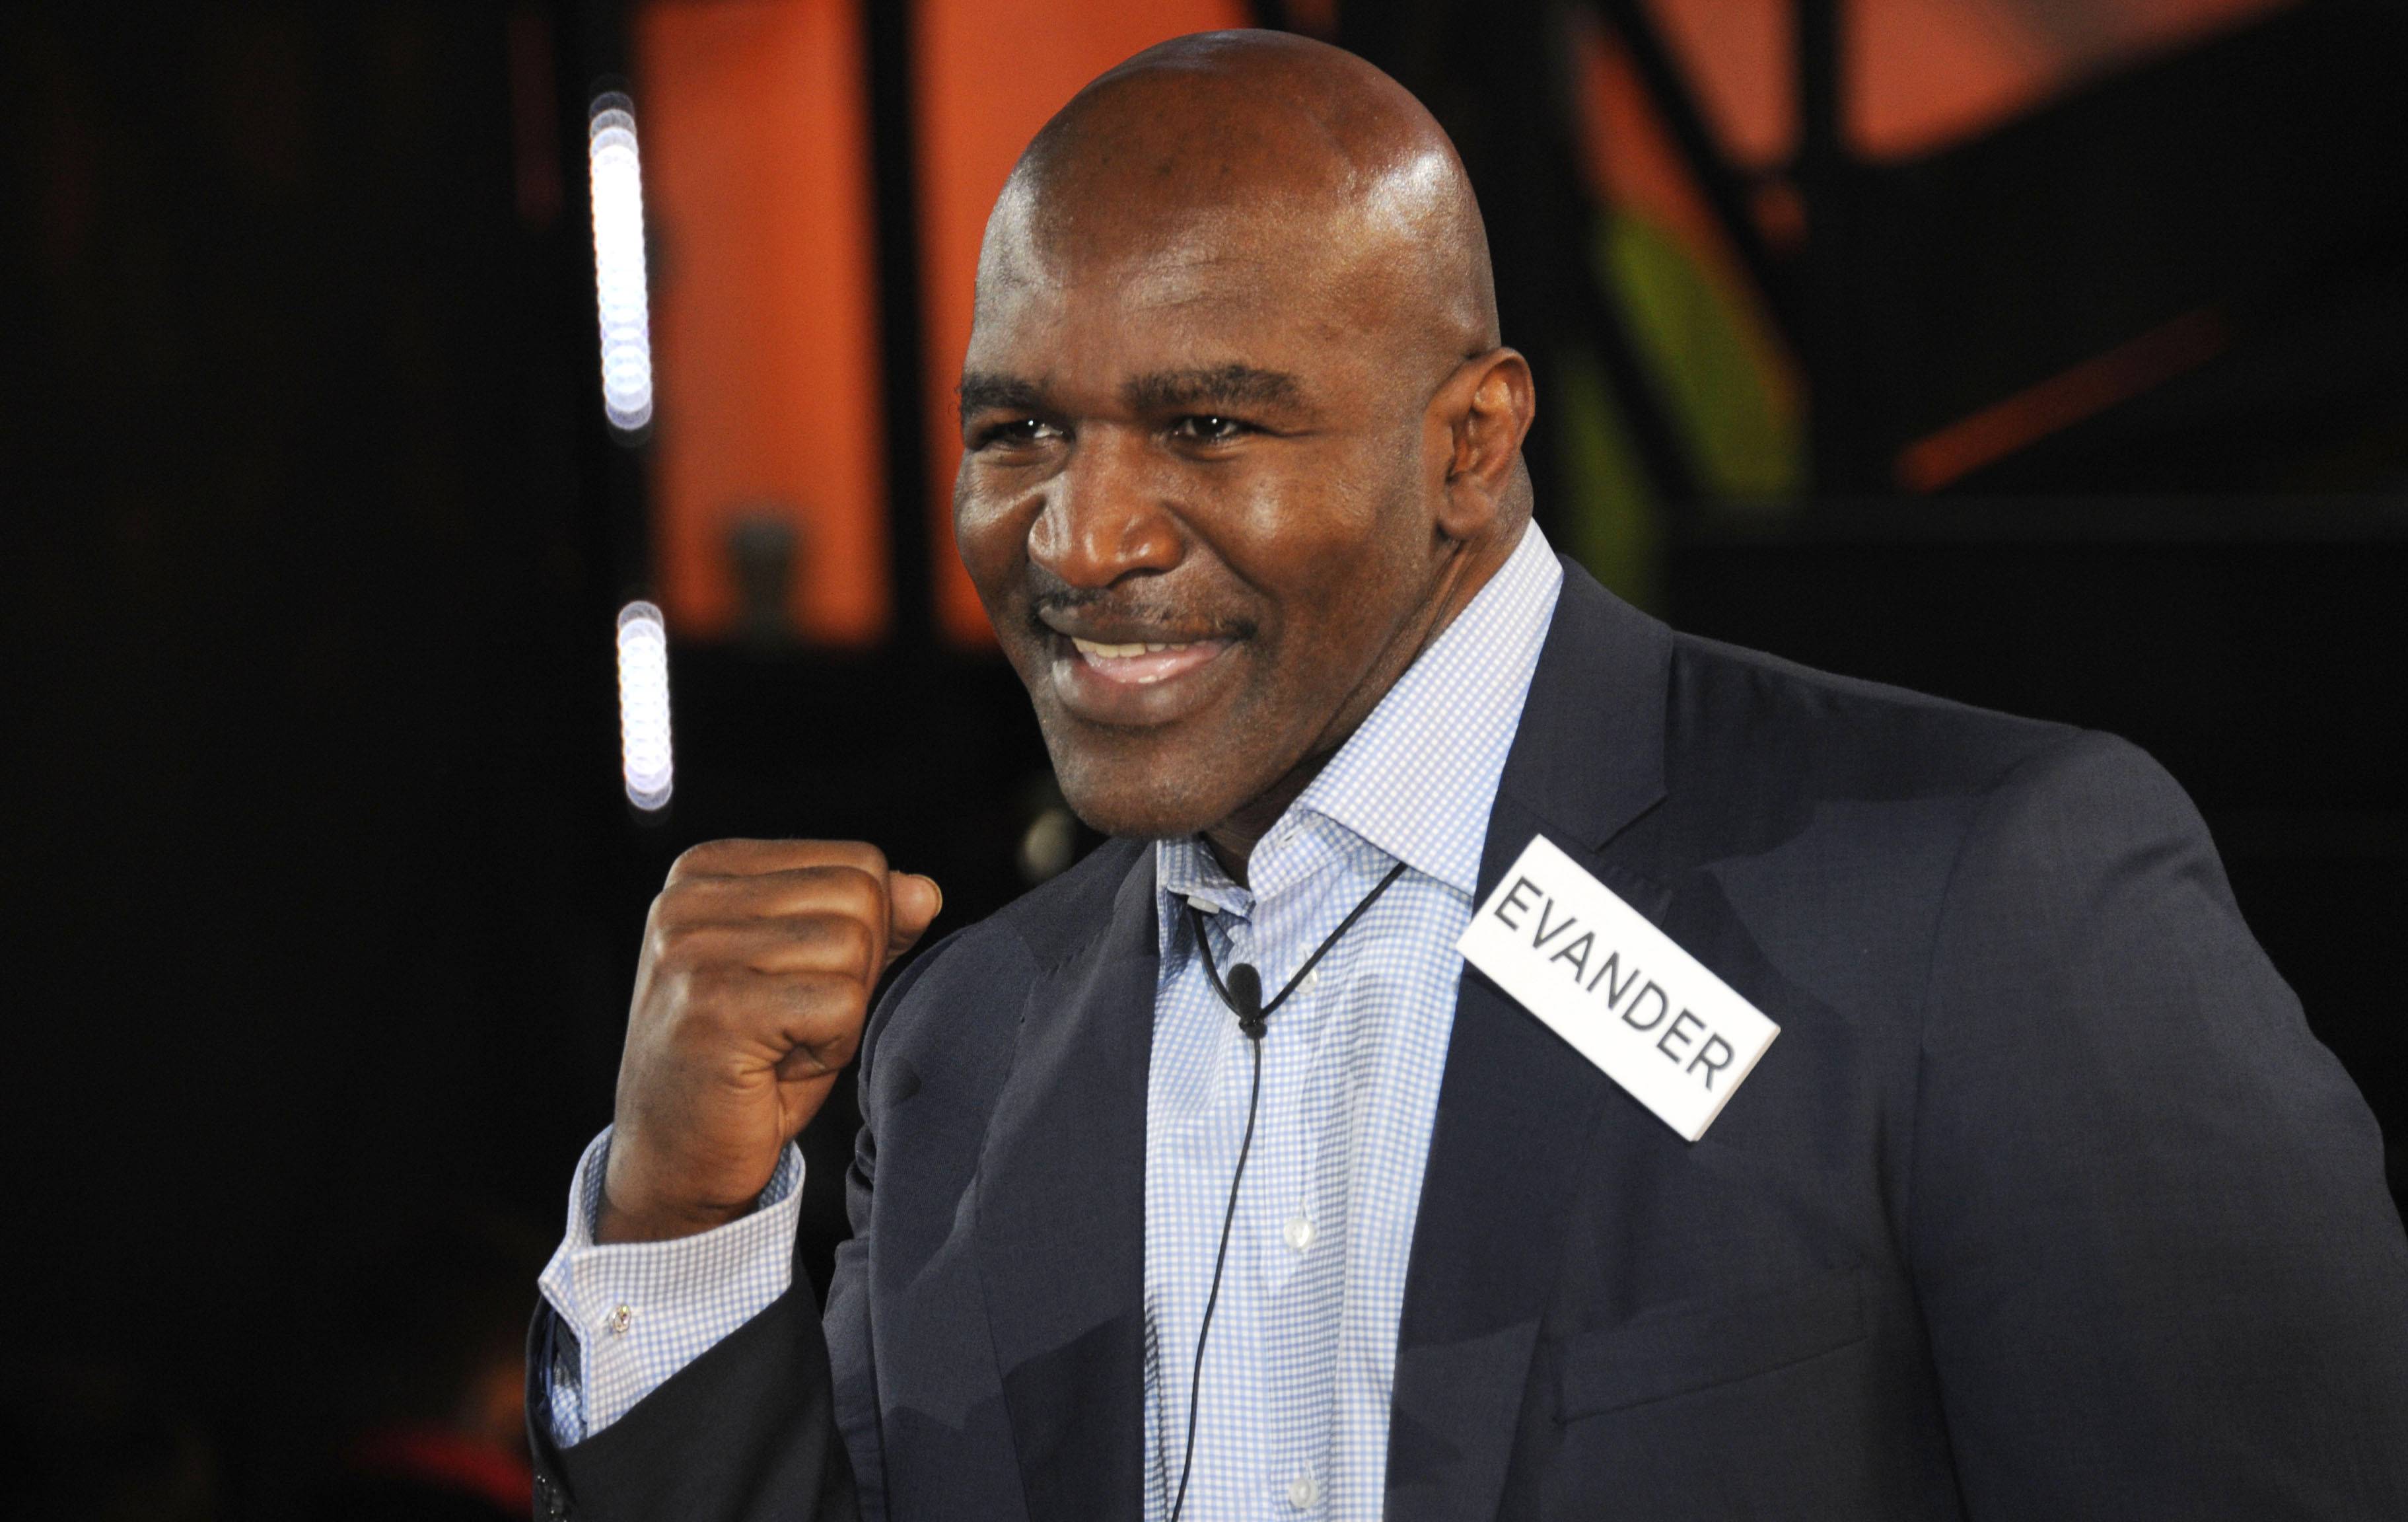 Evander Holyfield Says Gays Can Be “Fixed”